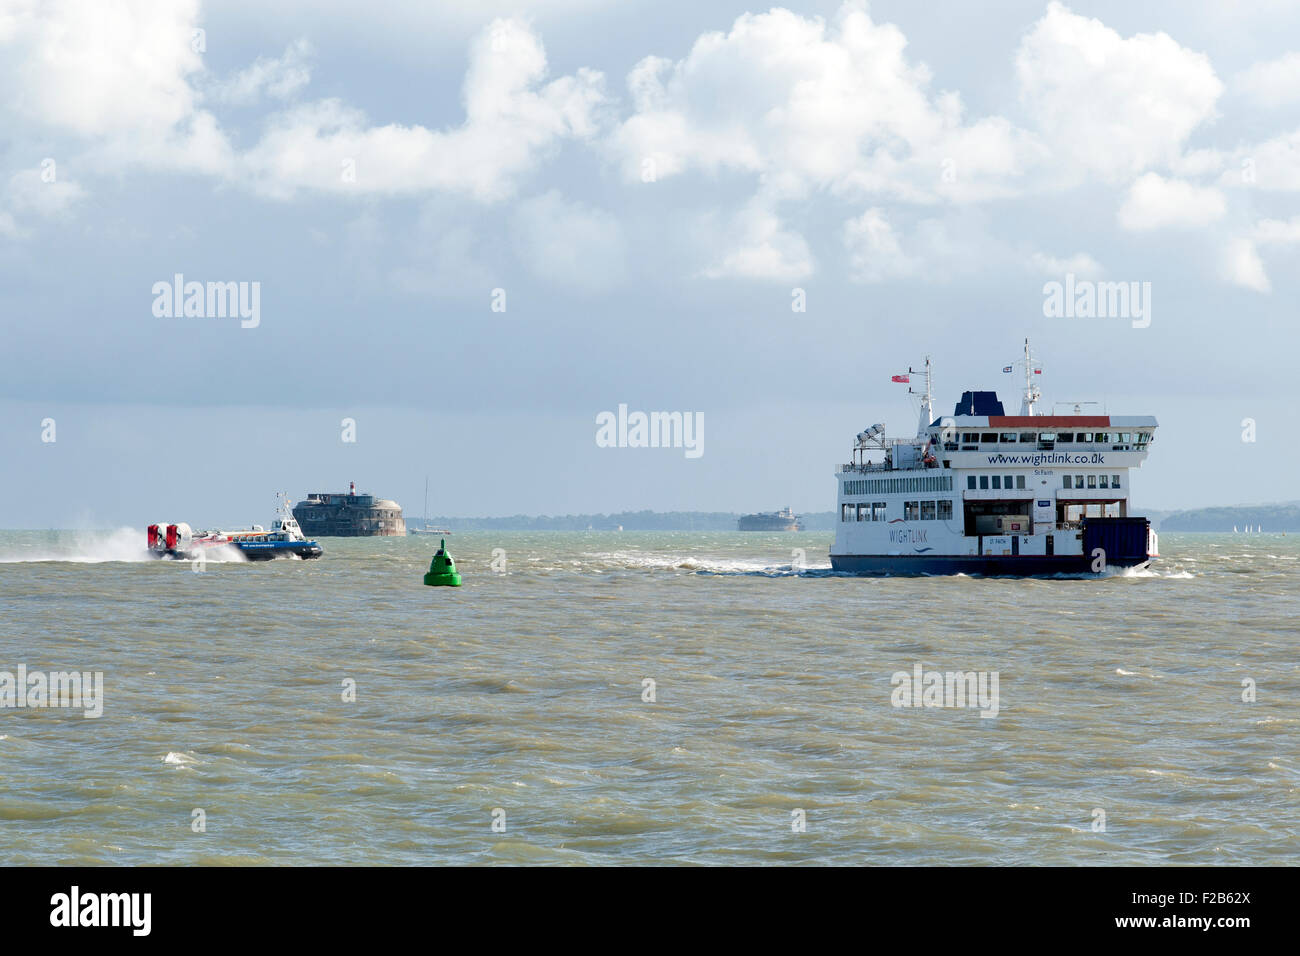 wight link ferry and hovercraft operating in the solent off southsea england uk Stock Photo